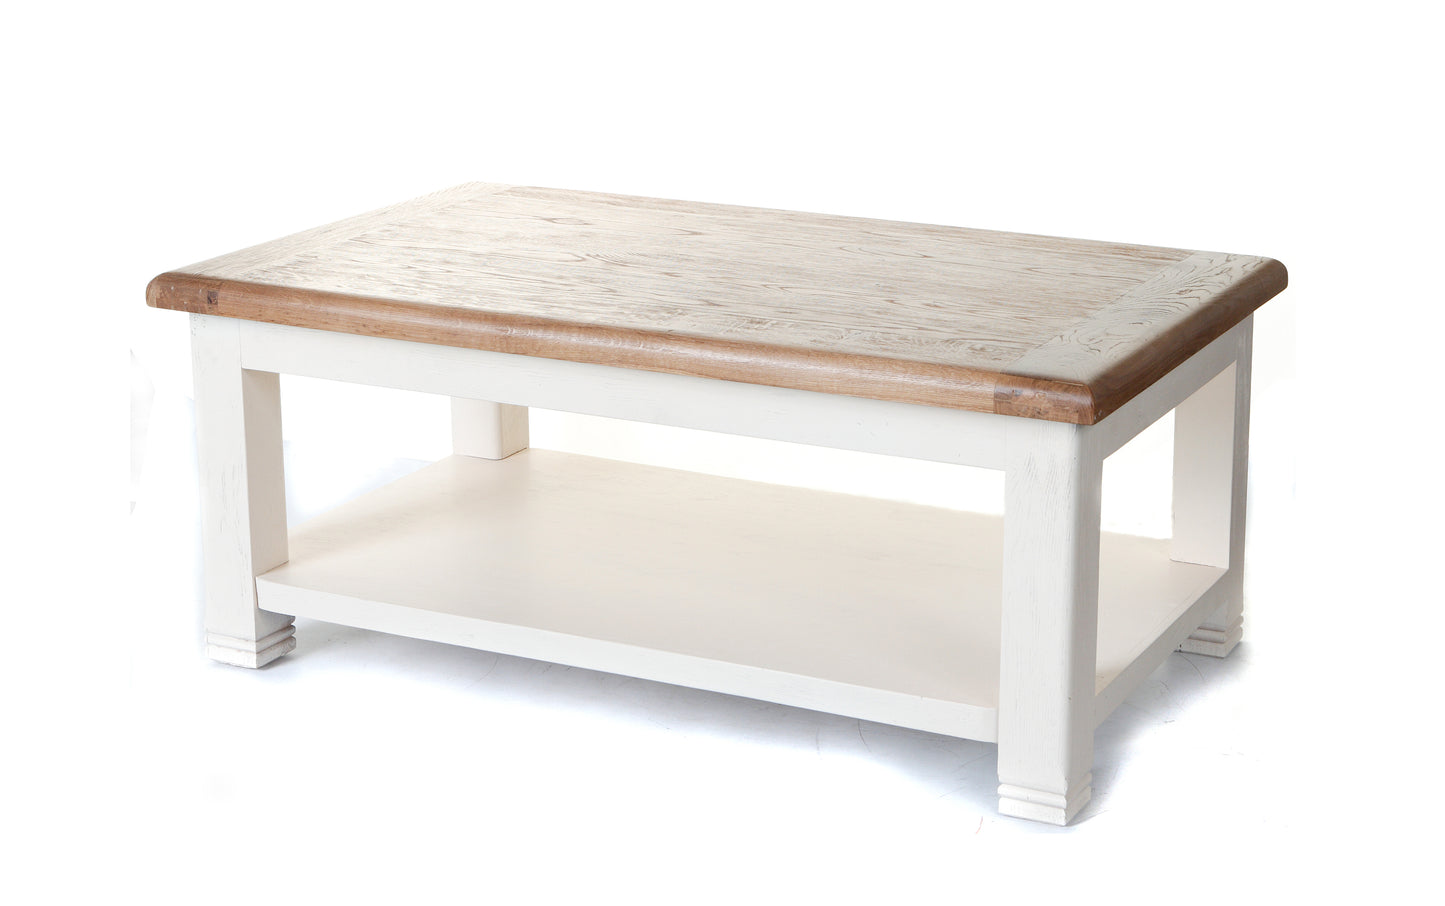 Danube Oak Coffee Table with Shelf painted Off White